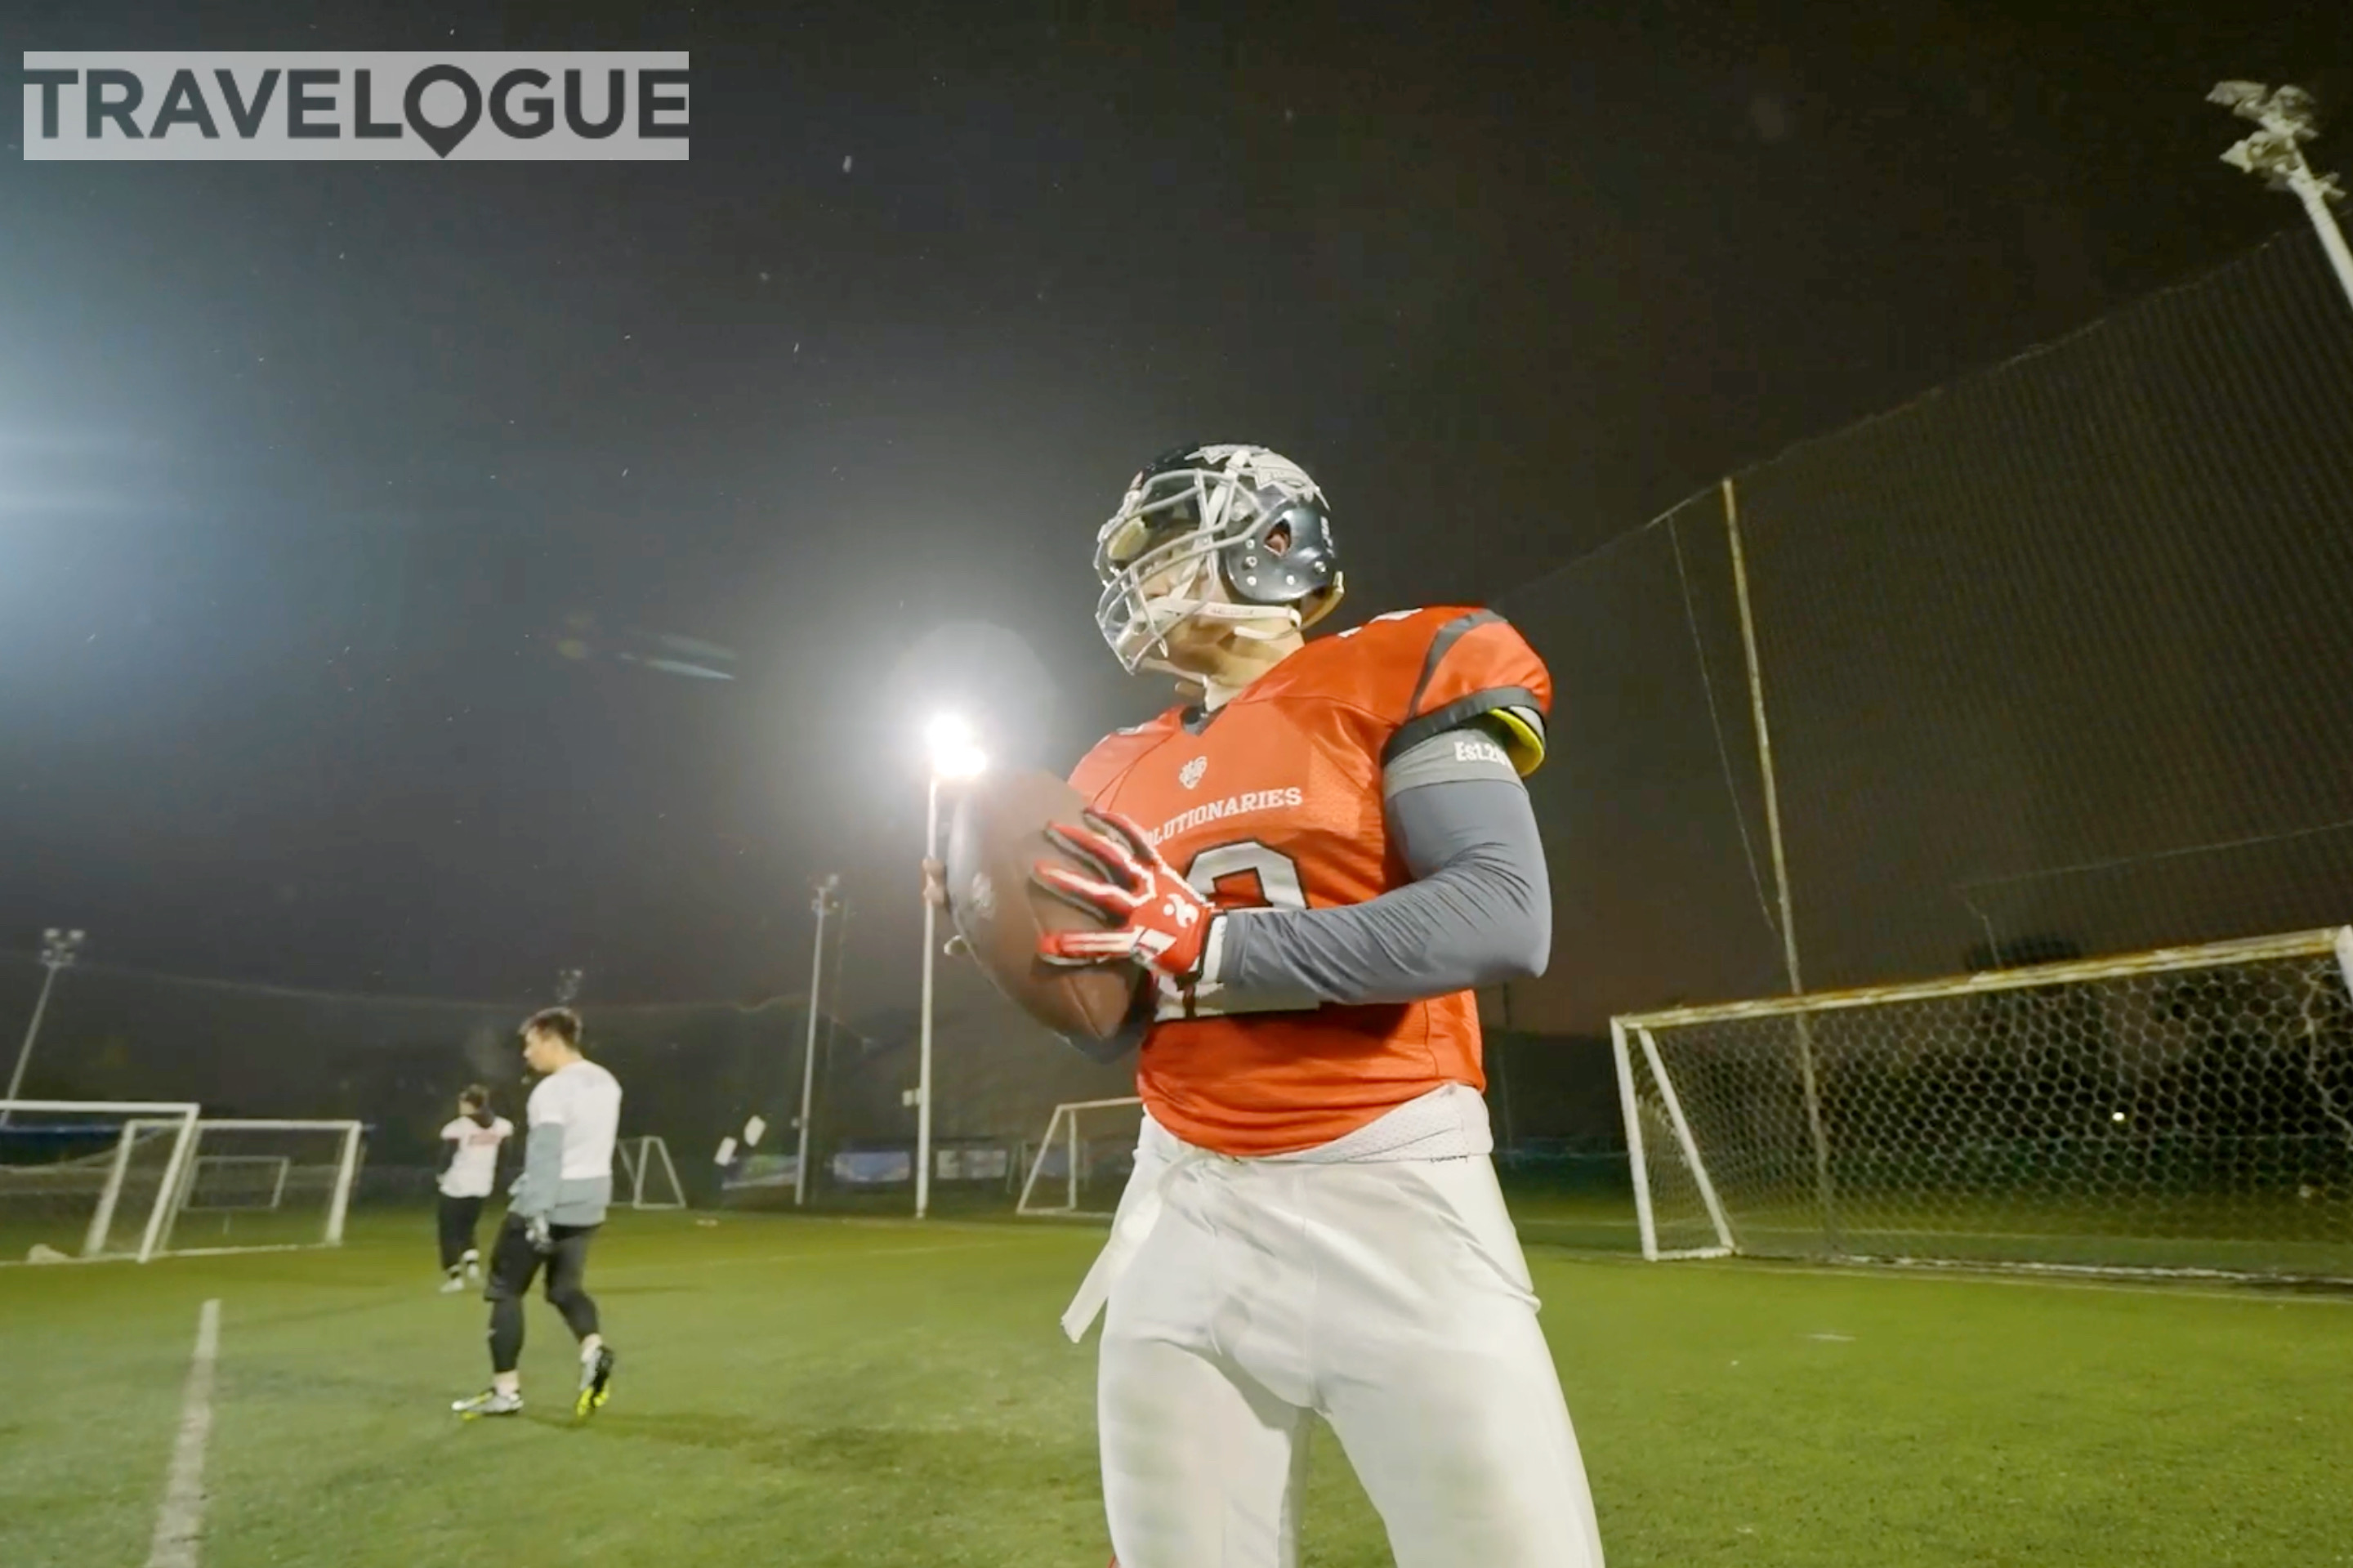 Peter Joseph Kuhn is an American NCAA football player and a big sports fan. In Changsha, he plays quarterback for the team named Changsha Revolutionaries. At weekends, he and his friends regularly get together to play football in Shawan Park. /CGTN